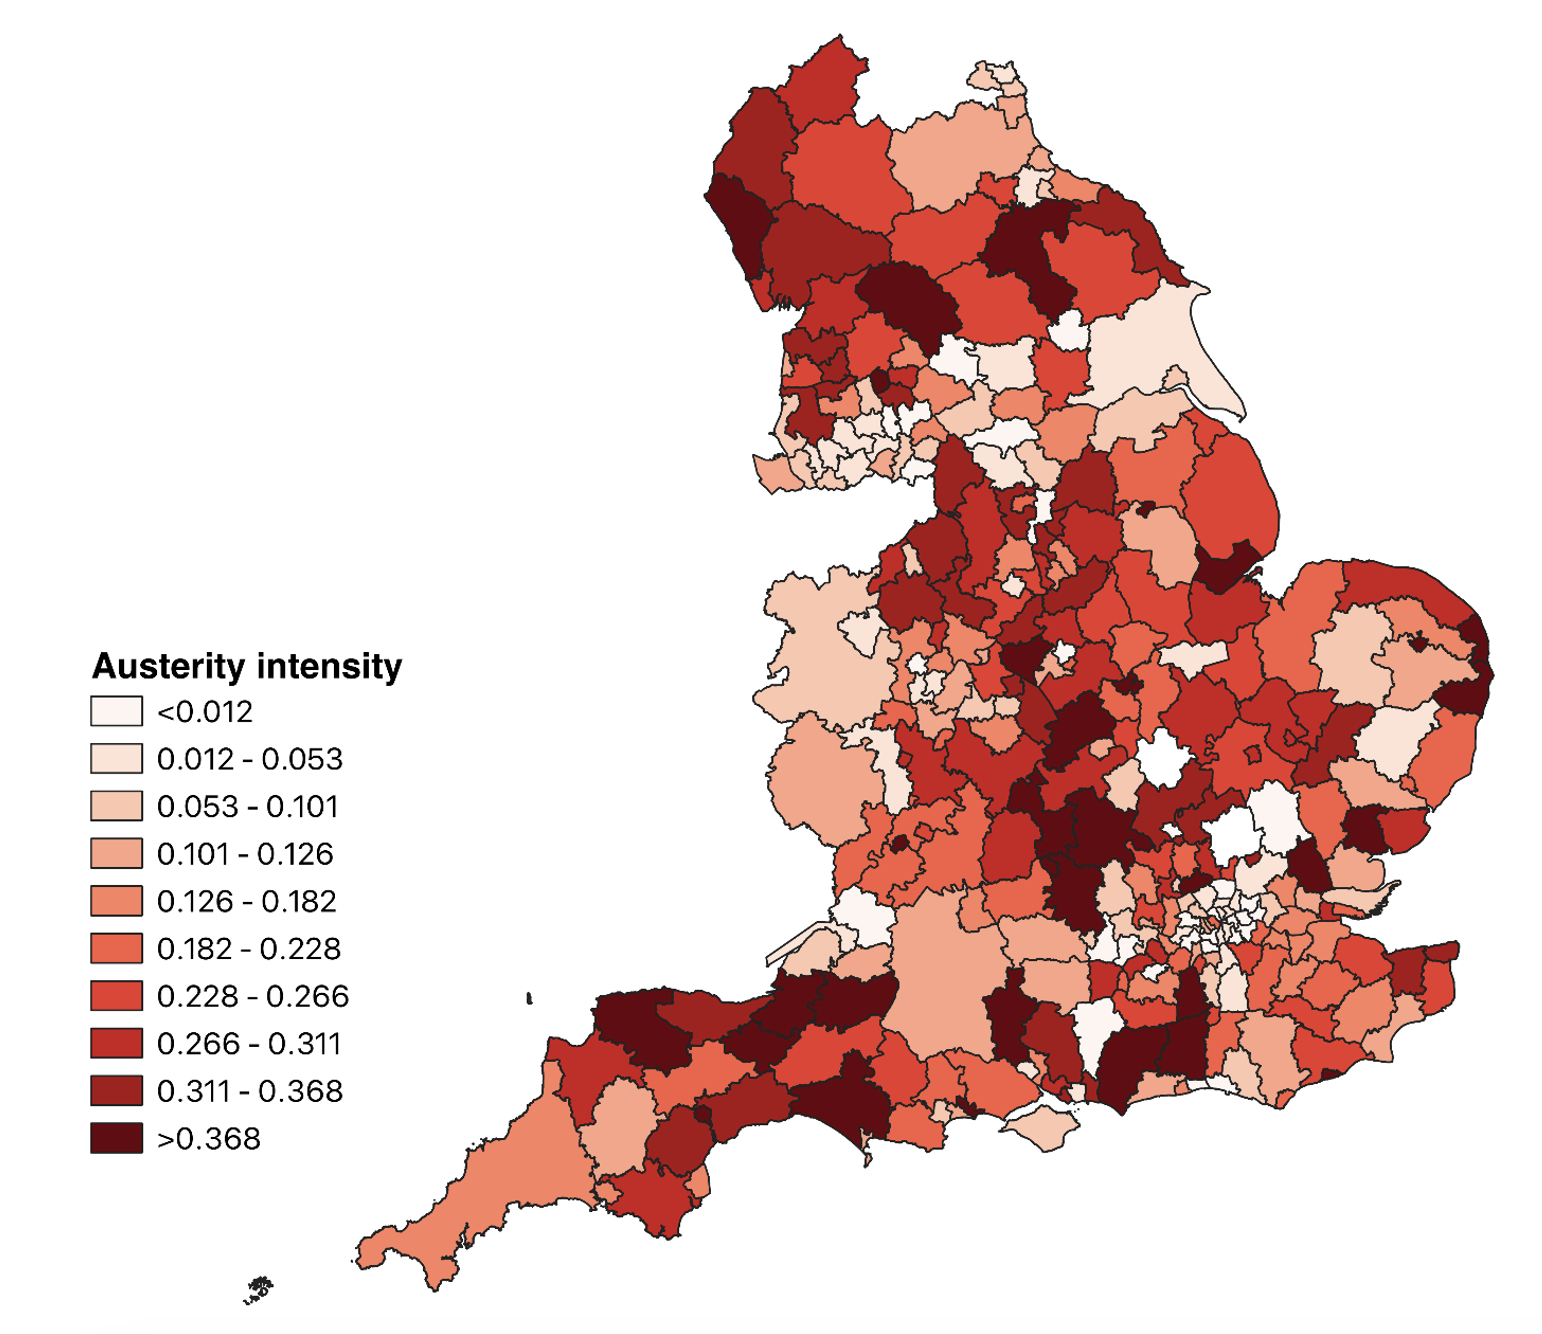 Figure 4 Large degree of variation in local spending cuts exposure following the 2010 budget cuts